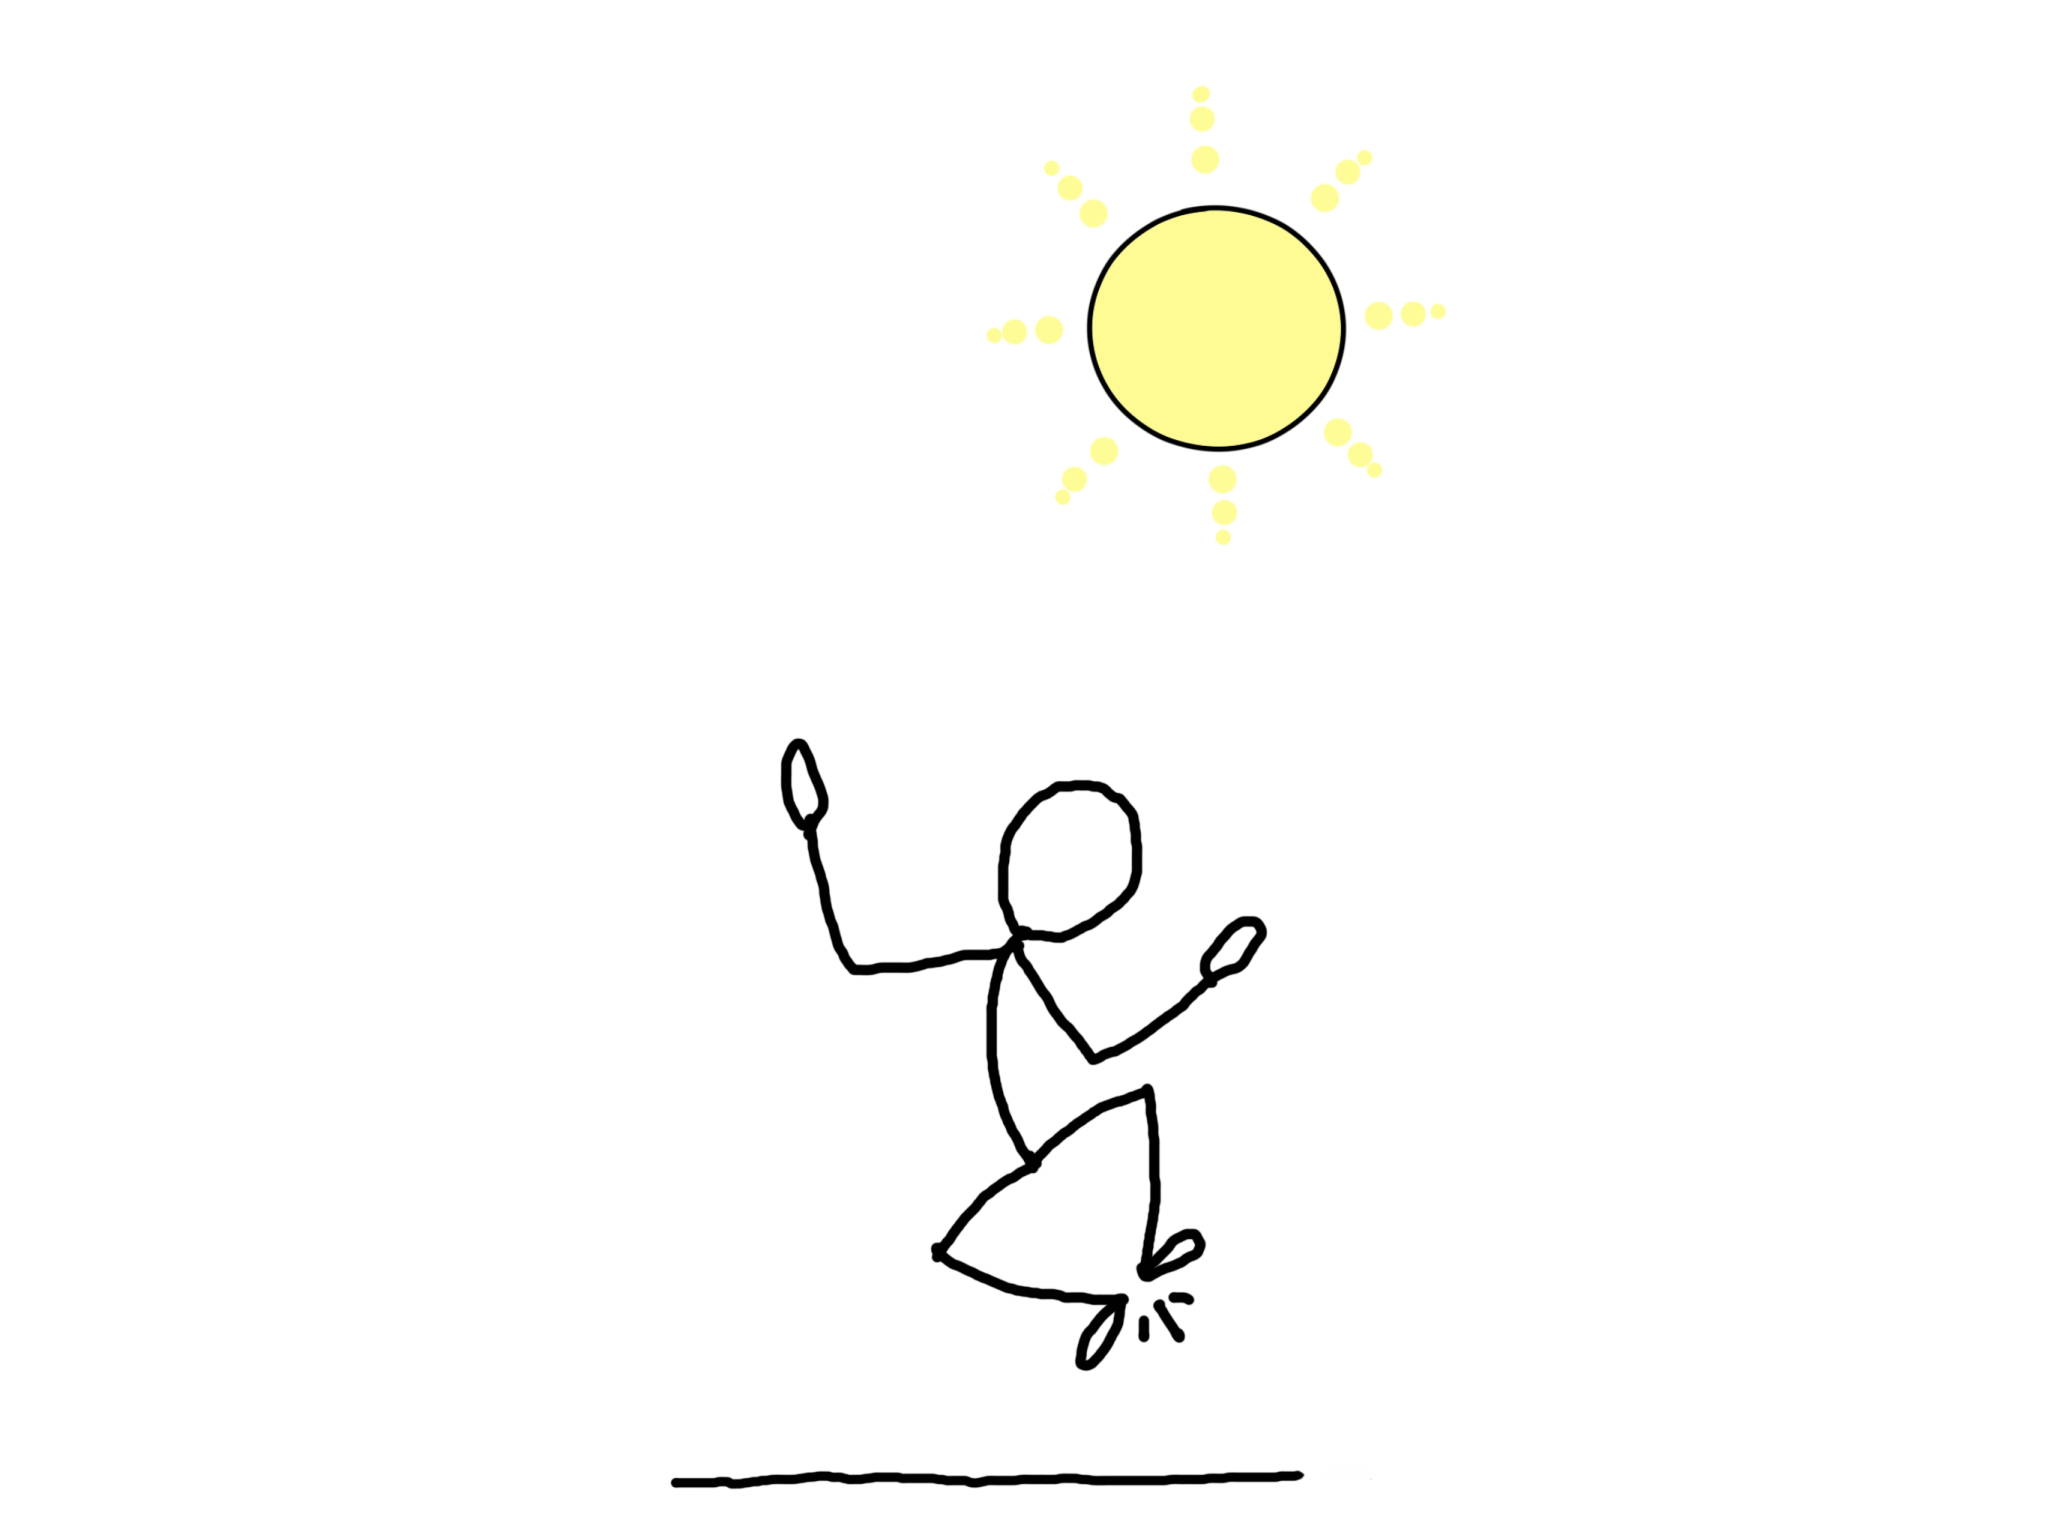 Drawing: A stick figure clicking it's heals with a sun shining above